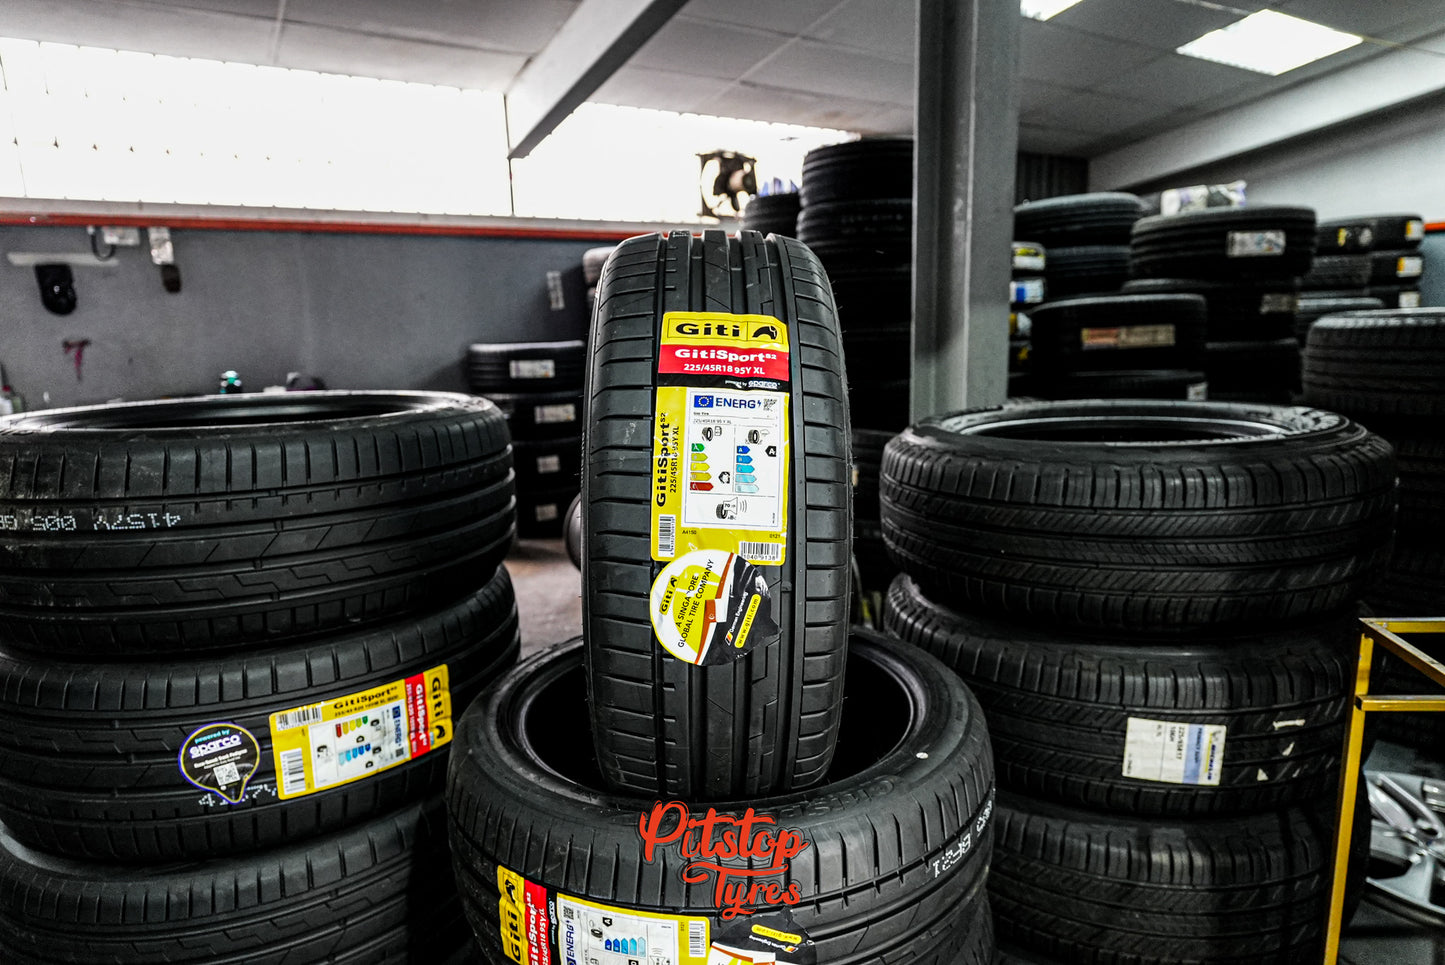 Giti Tyres | Singapore Tyres | Budget Value Tyres Best Quality